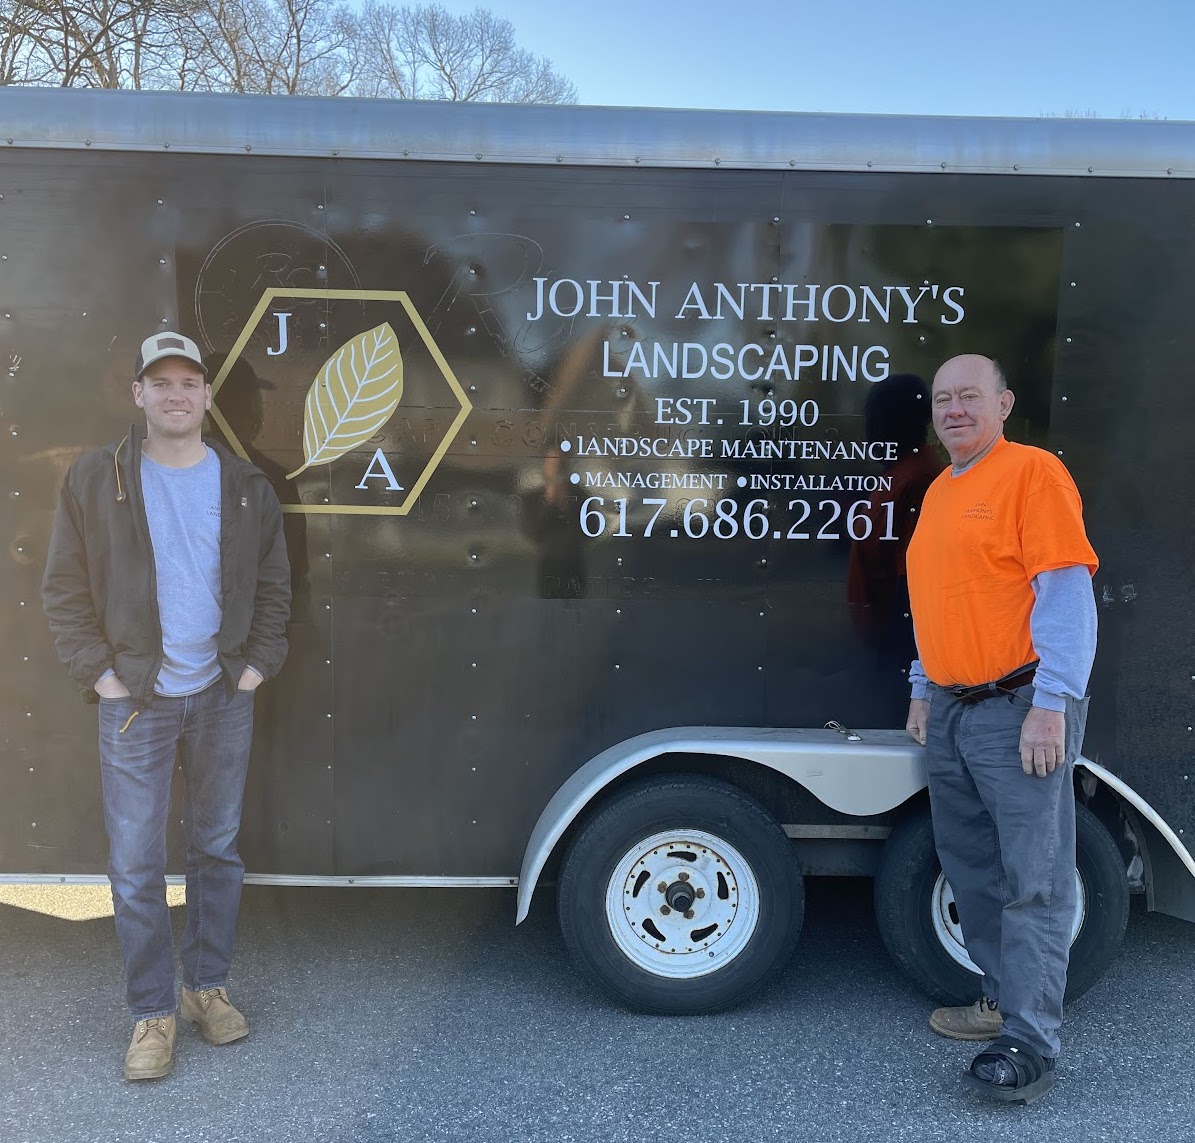 Business Profile: Father-son team at John Anthony’s Landscaping ready to dig in